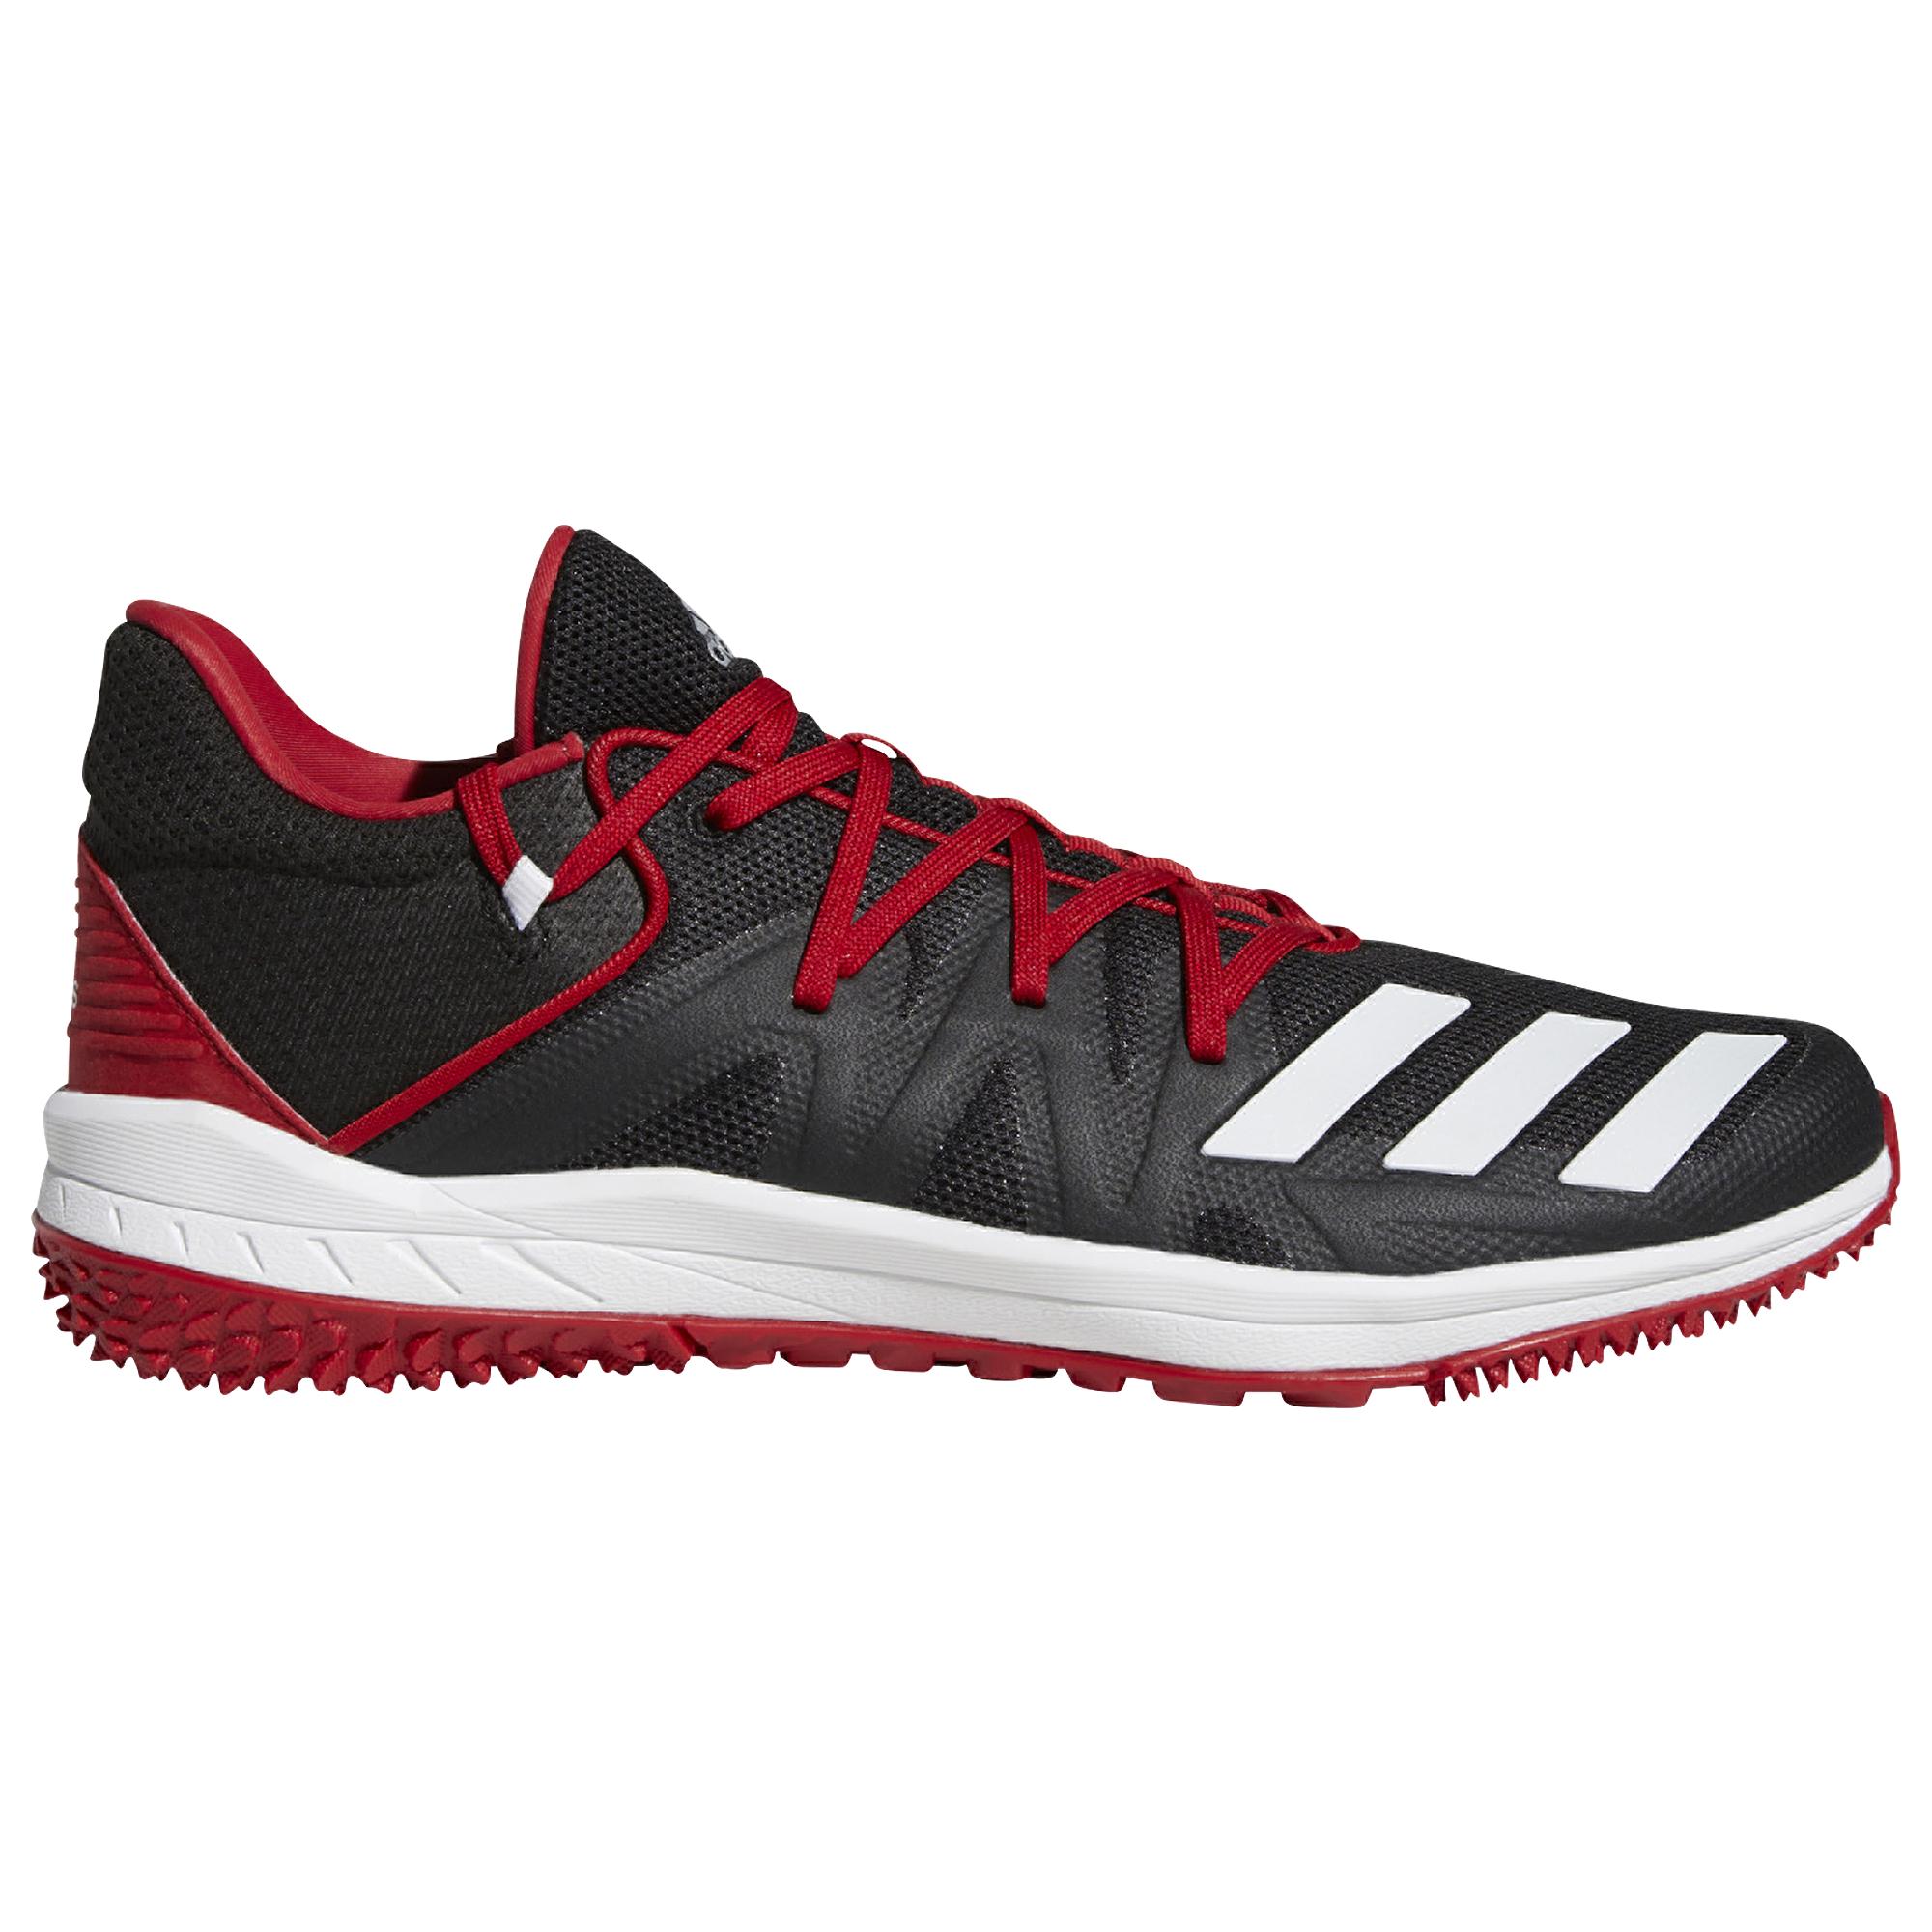 adidas Speed Turf Turf Shoes in Black/White/Scarlet (Red) for Men - Lyst